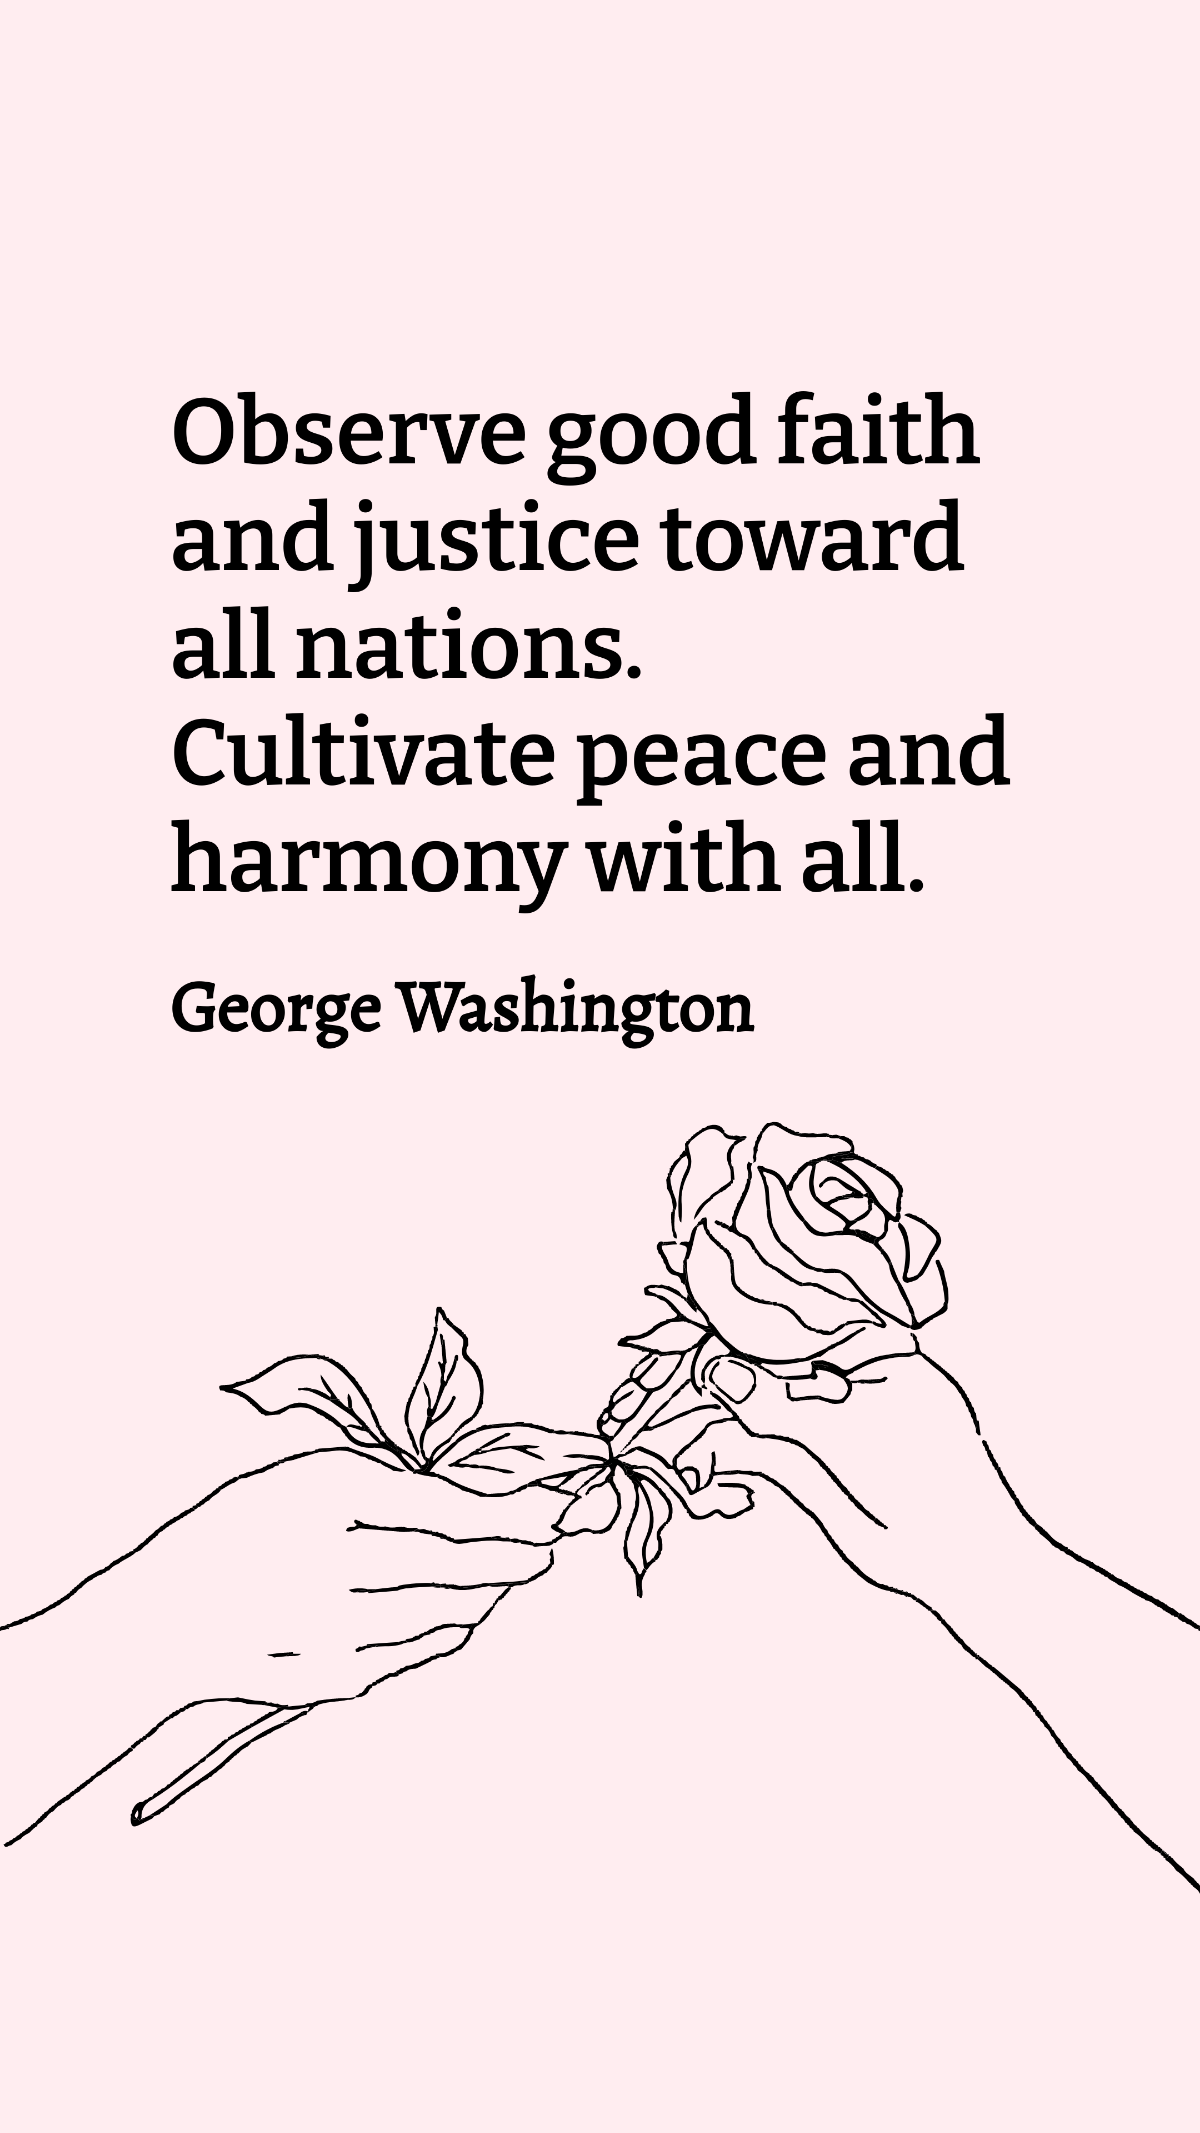 George Washington - Observe good faith and justice toward all nations. Cultivate peace and harmony with all. Template